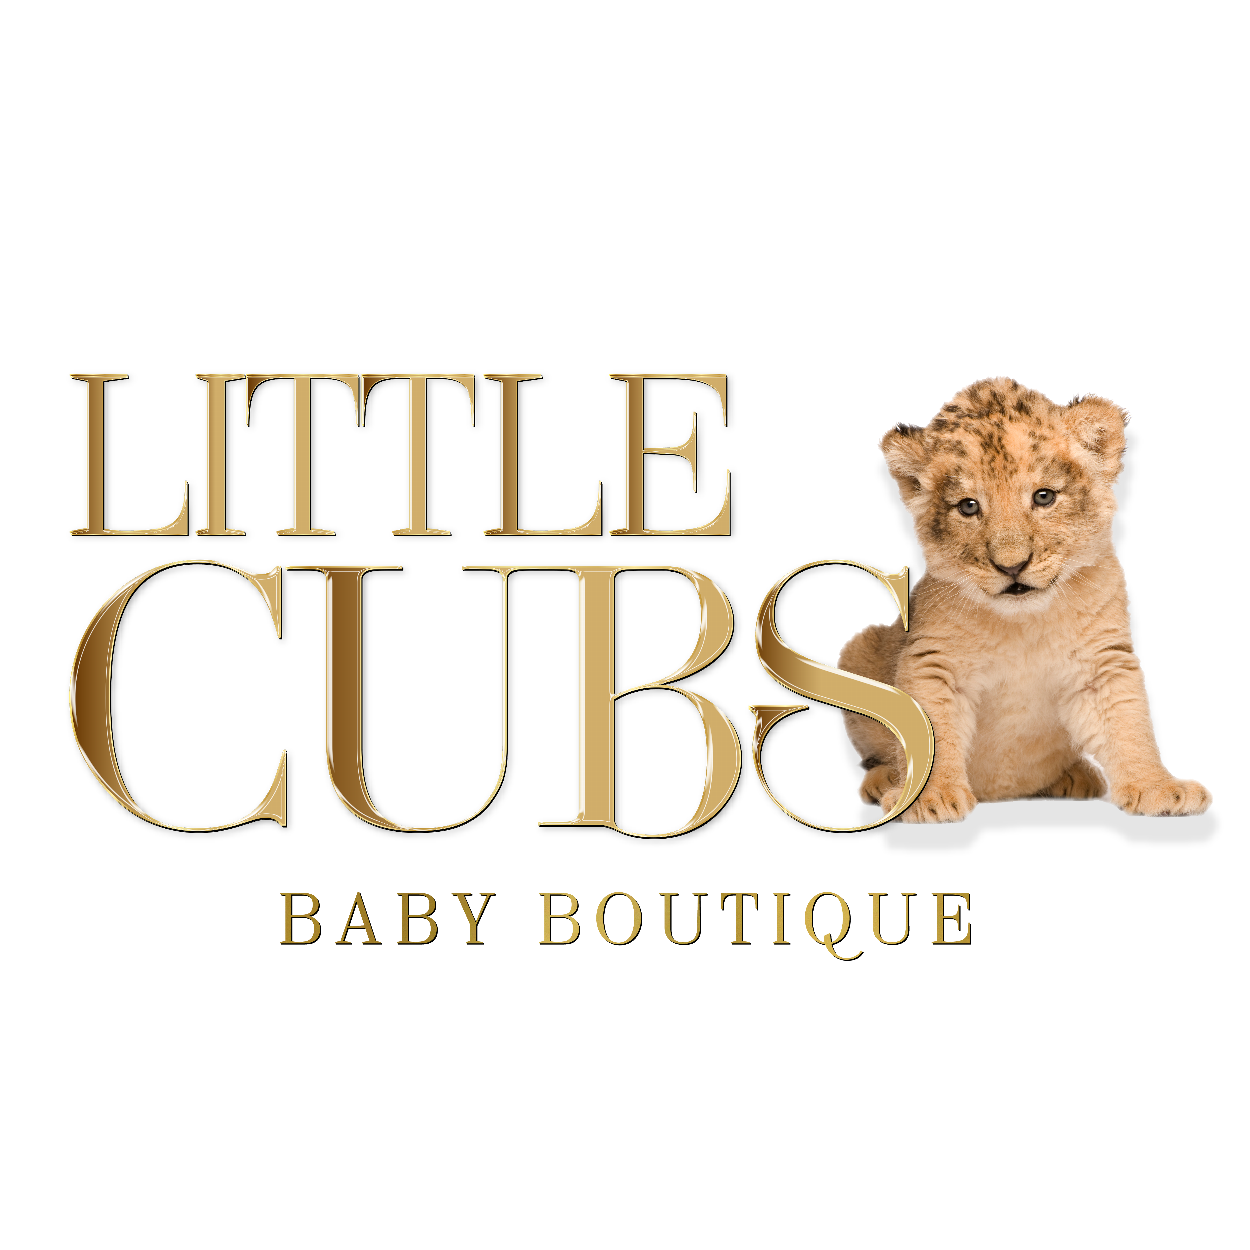 Baby Clothing Boutique selling Baby Clothes and Gifts